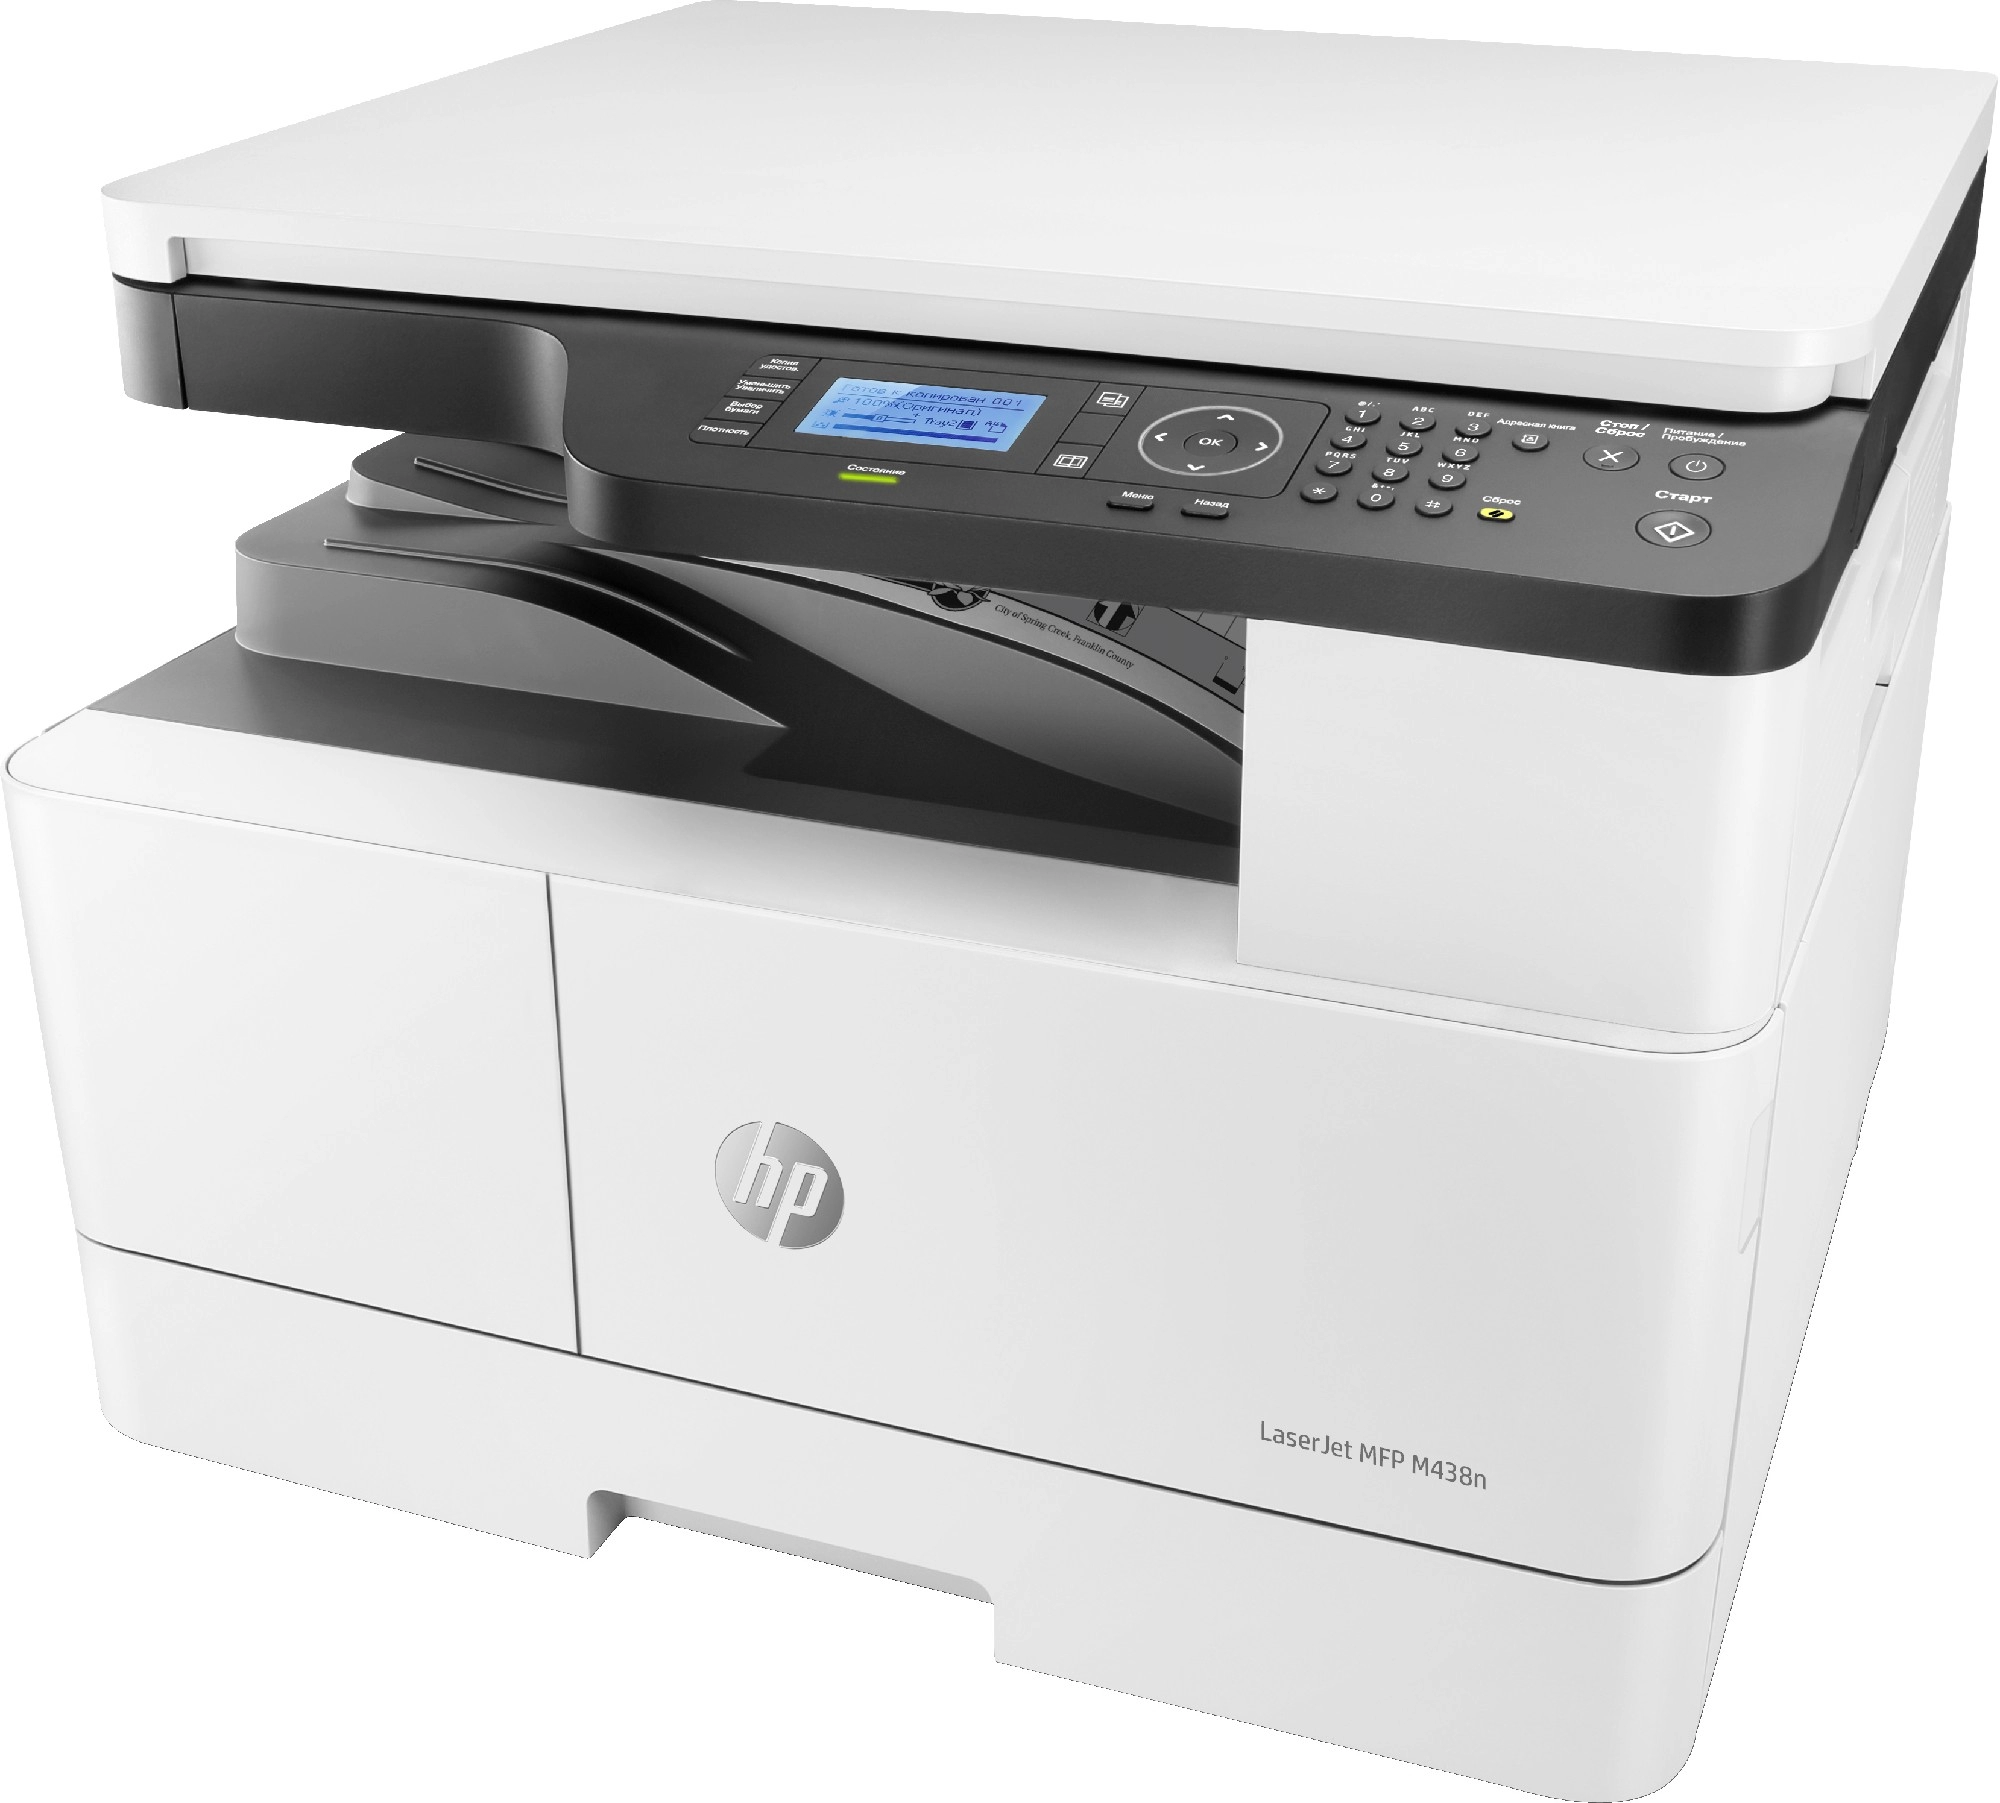 MFP A3 HP LaserJet M438n, White, up to 24ppm, 1200*1200dpi, 256MB,  4-Line LCD display, up to 50000 pag/month, Scanner up to 4800х4800, Hi-Speed USB 2.0,10/100 Base TX , HP PCL 6, Toner W1335A (7,400 pag), W1335X  (13,700 pages),Imaging Drum CF257A (80,00